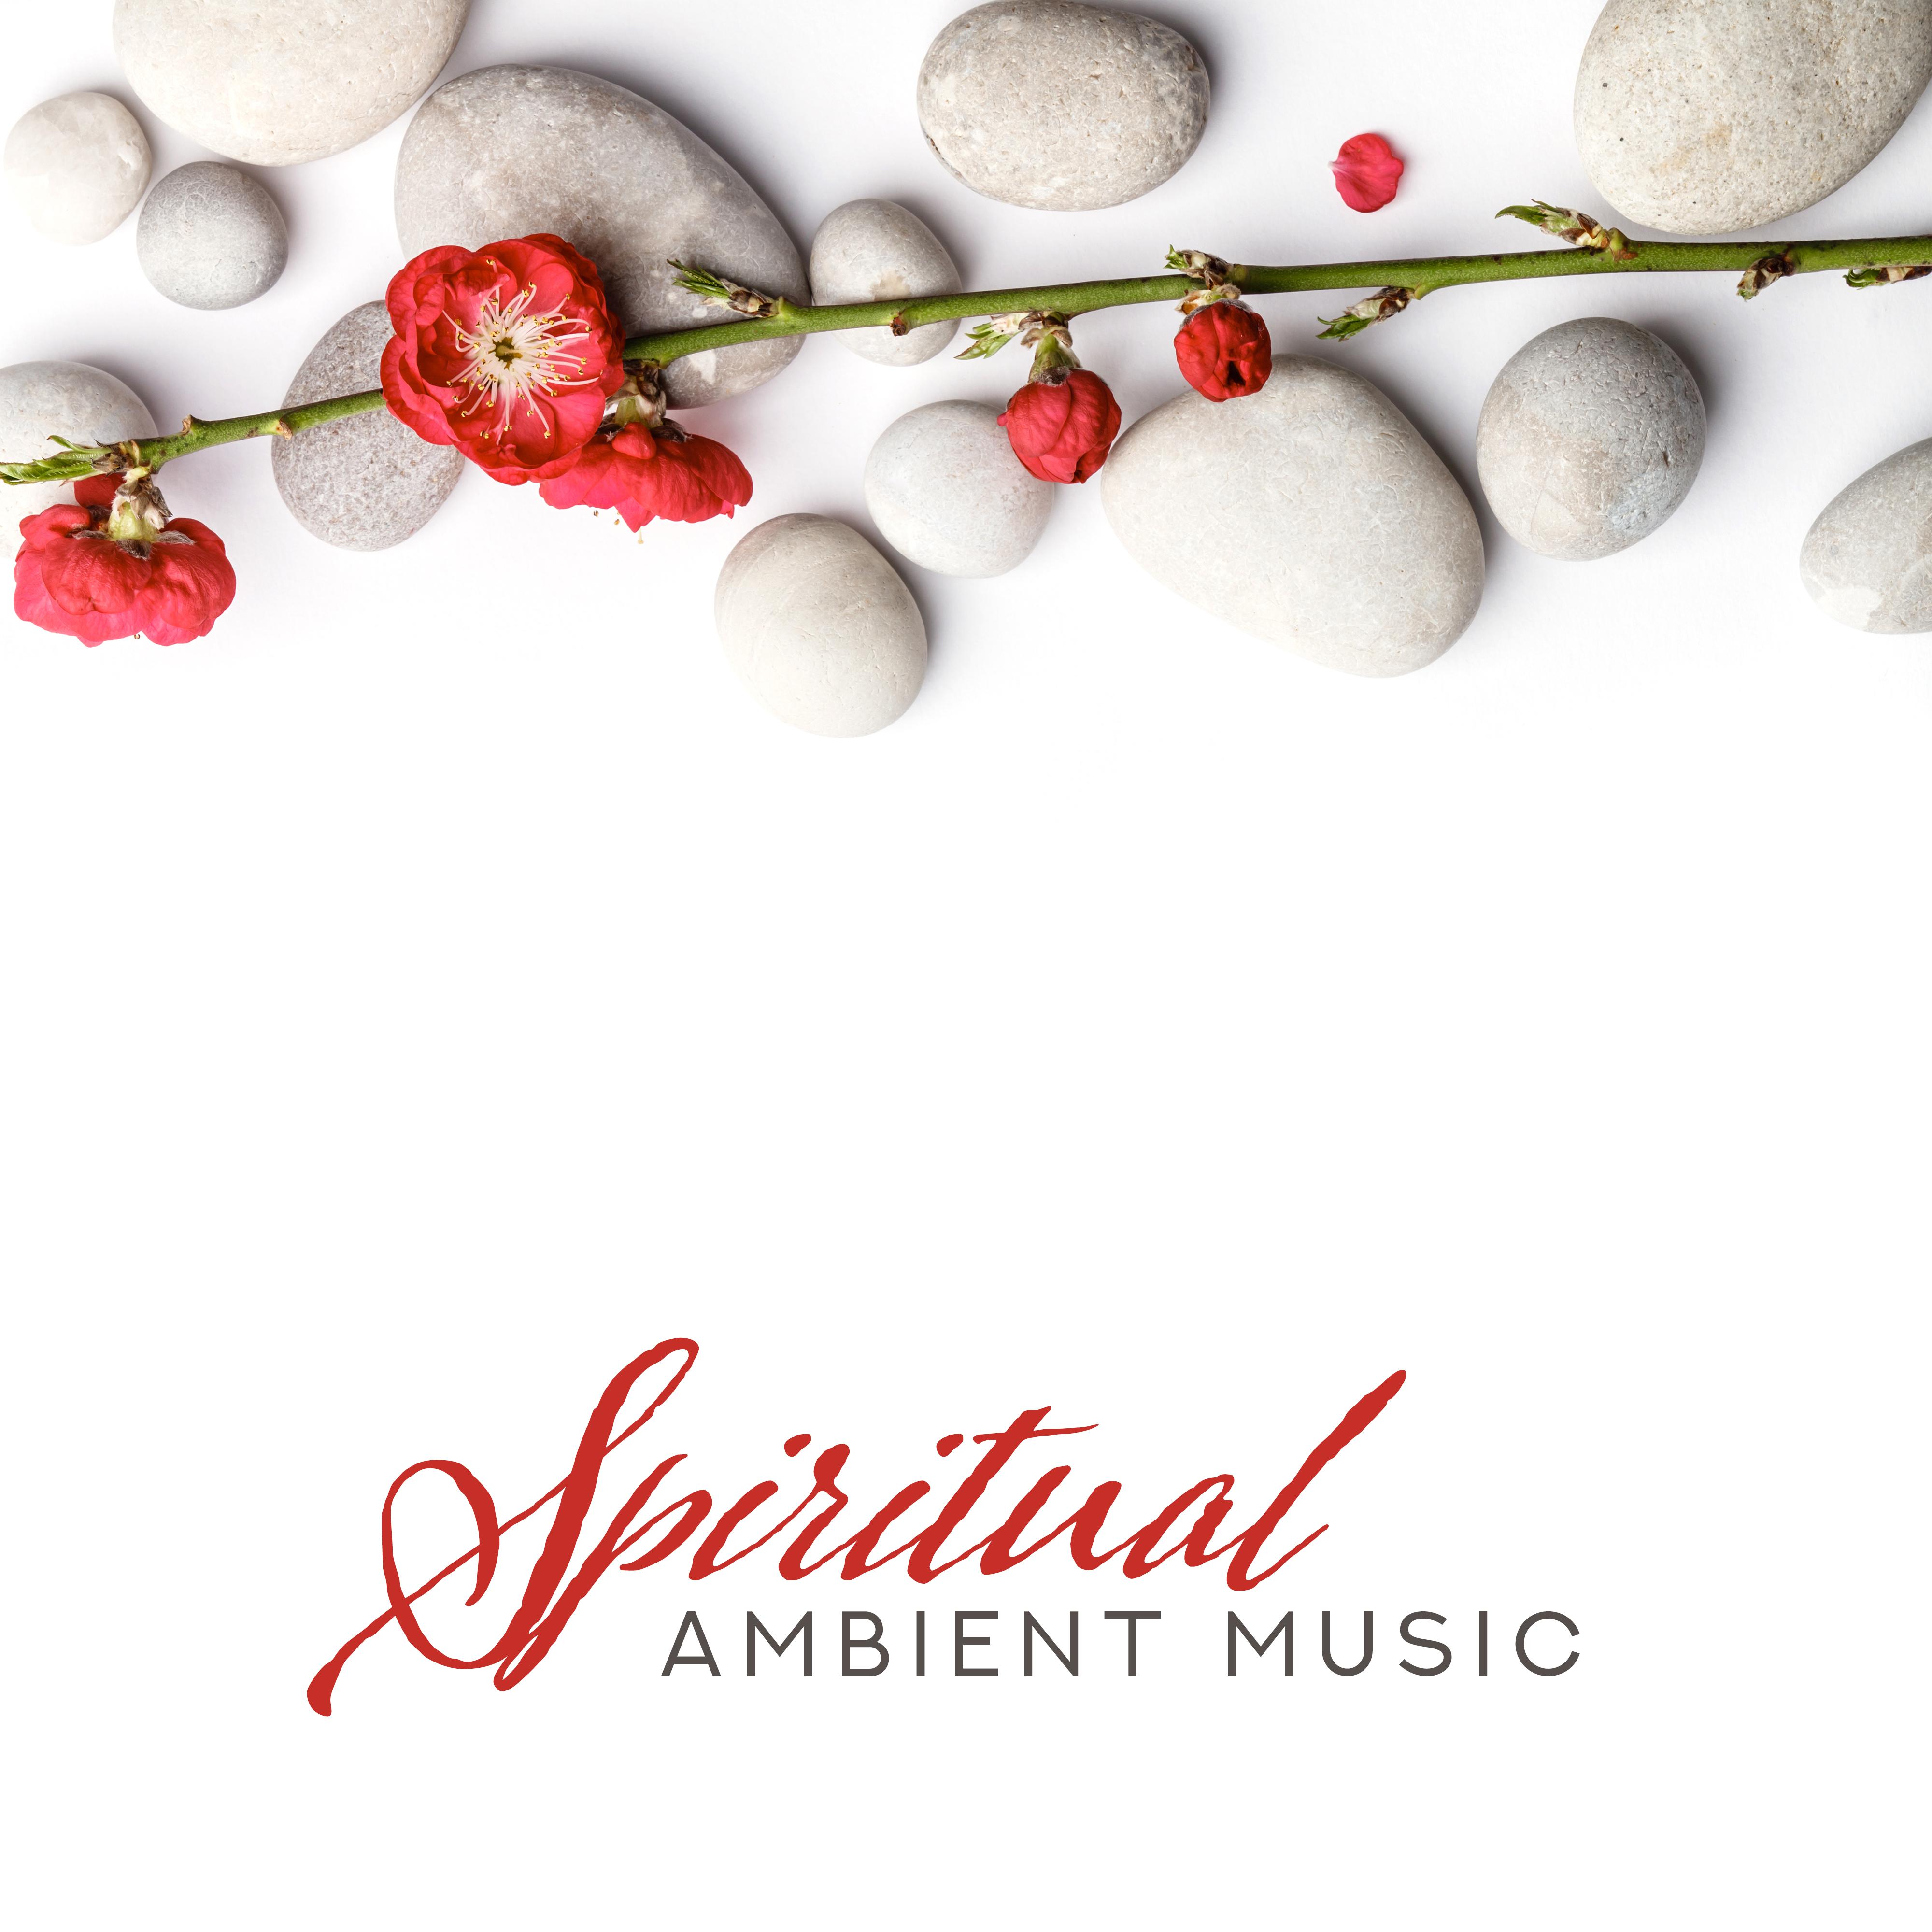 Spiritual Ambient Music - Intended for Meditation, Yoga, Buddhist Zen Practice, Recitation of Mantras and Reiki